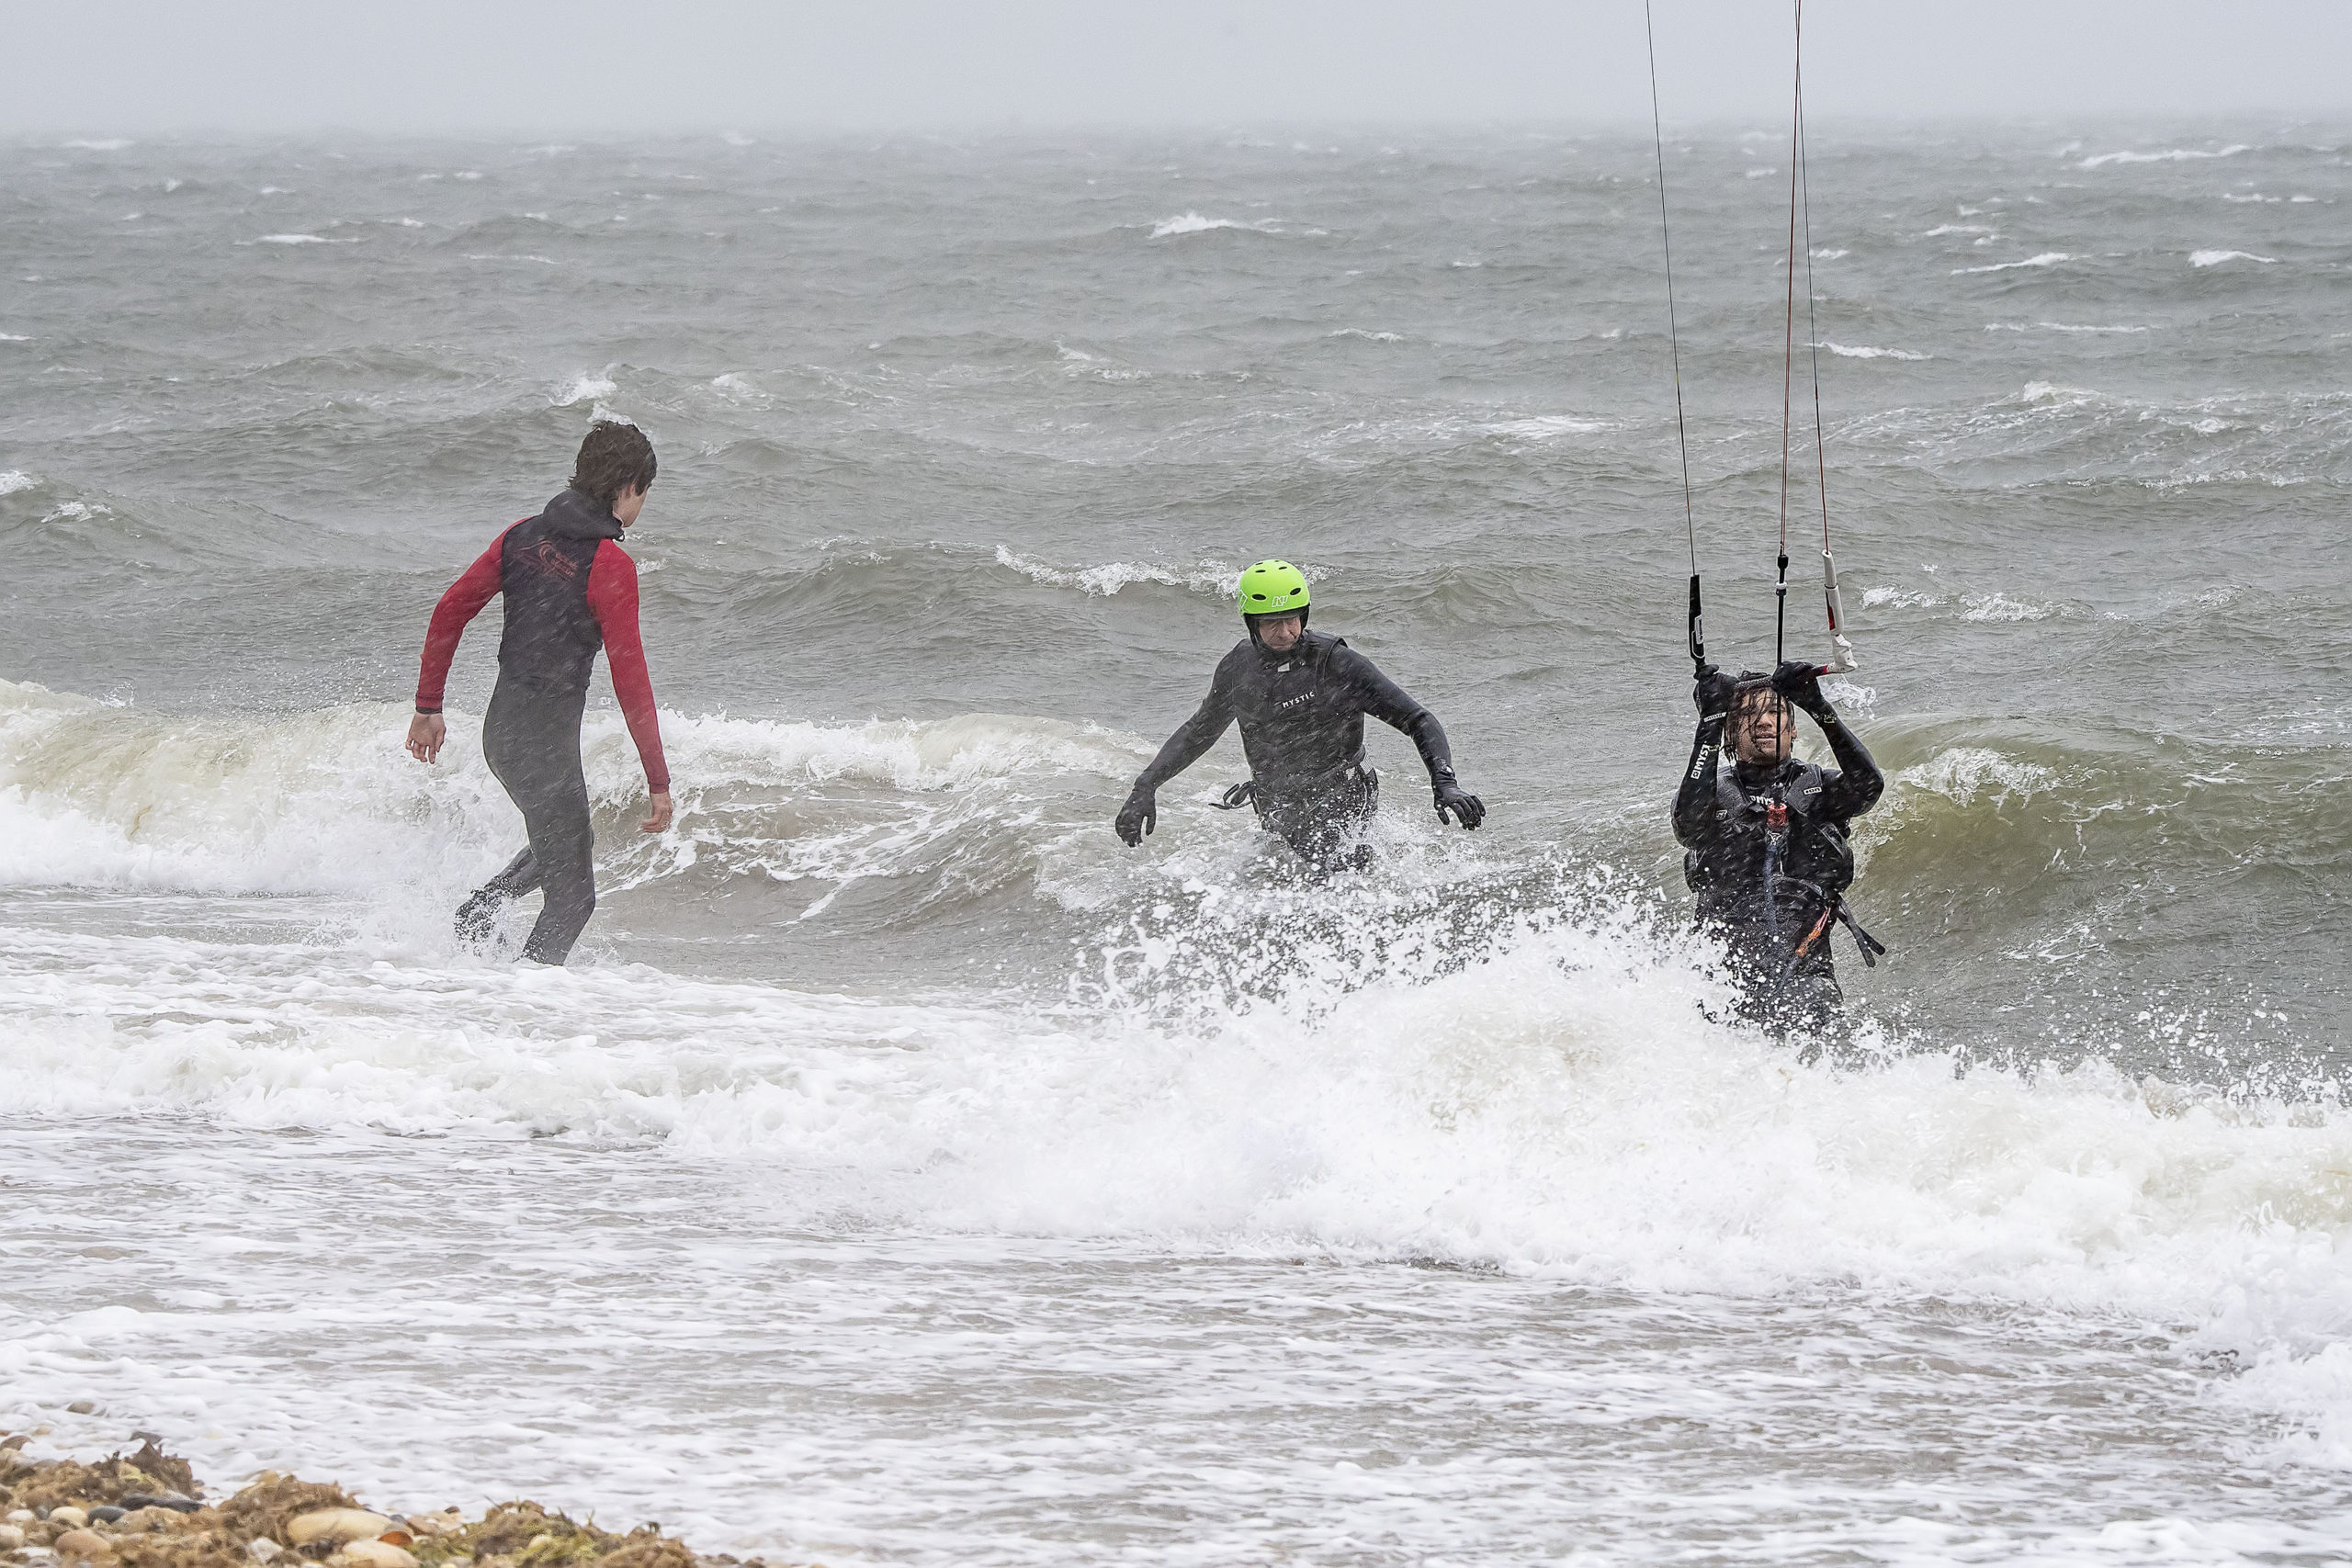 Members of the East Hampton Ocean Rescue Team used a jetski and sled to help with rescuing two kiteboarders who were caught out in the gale-force winds and rough waters east of Gerard Drive in Springs.